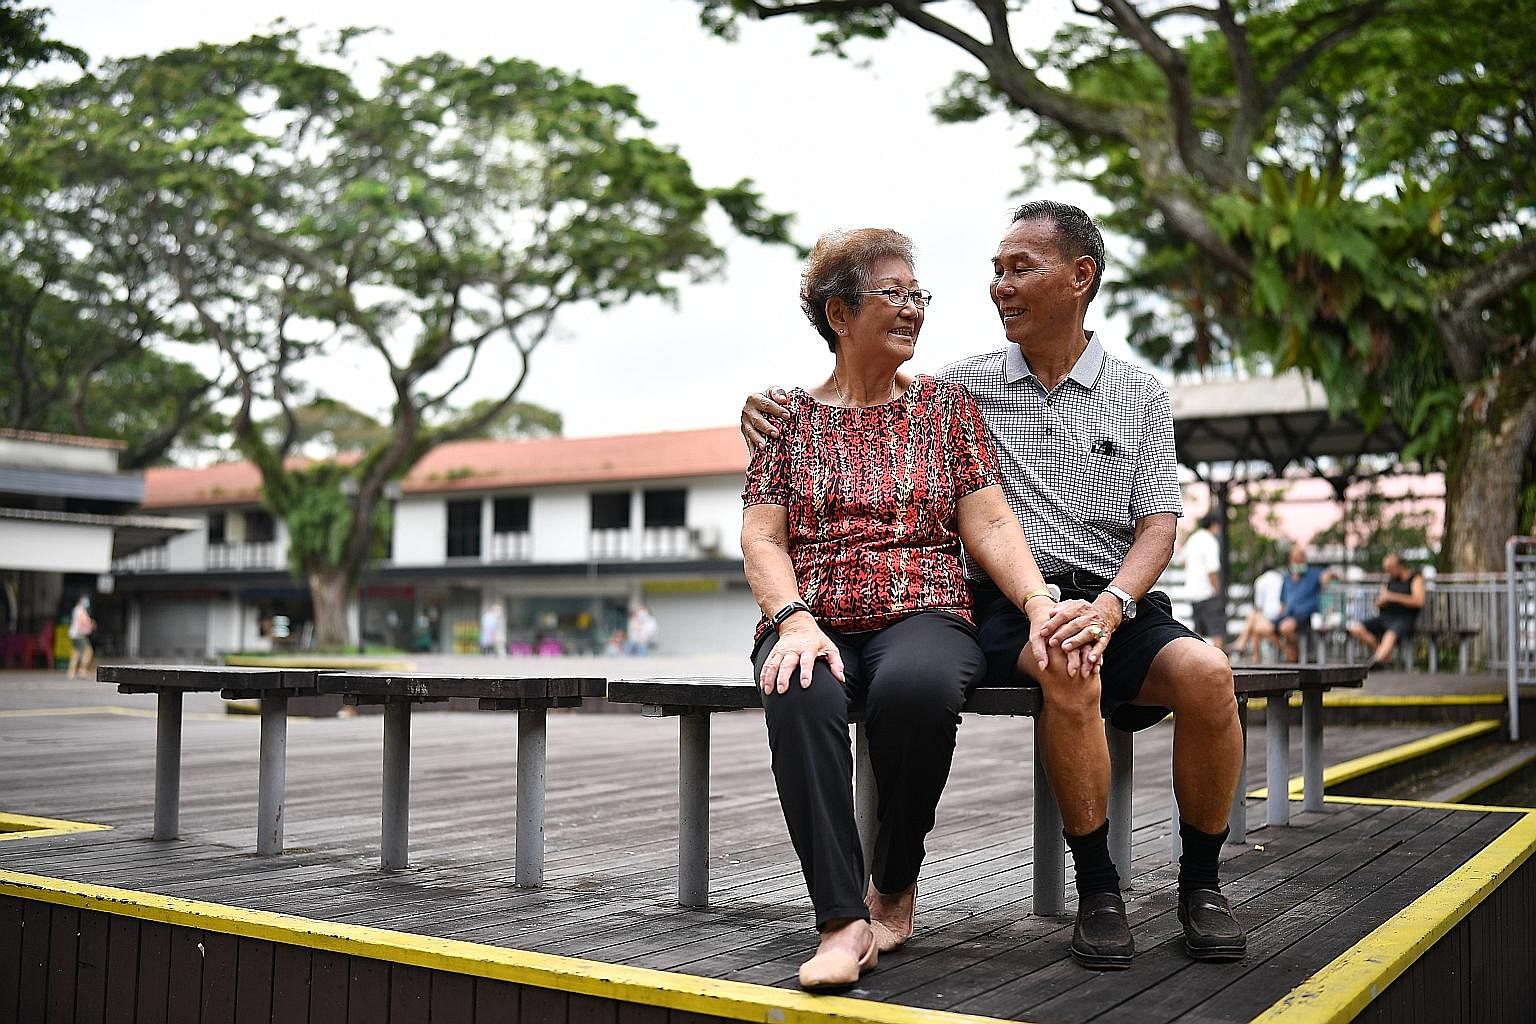 Mr Eric Chua, an MP for Tanjong Pagar GRC, says he is keenly aware of how residents feel about moving out of Tanglin Halt. He is planning a documentary that captures the charm of the estate. Madam Leong Mei, 76, with her husband, Mr Yee Kong Hoi, 82,